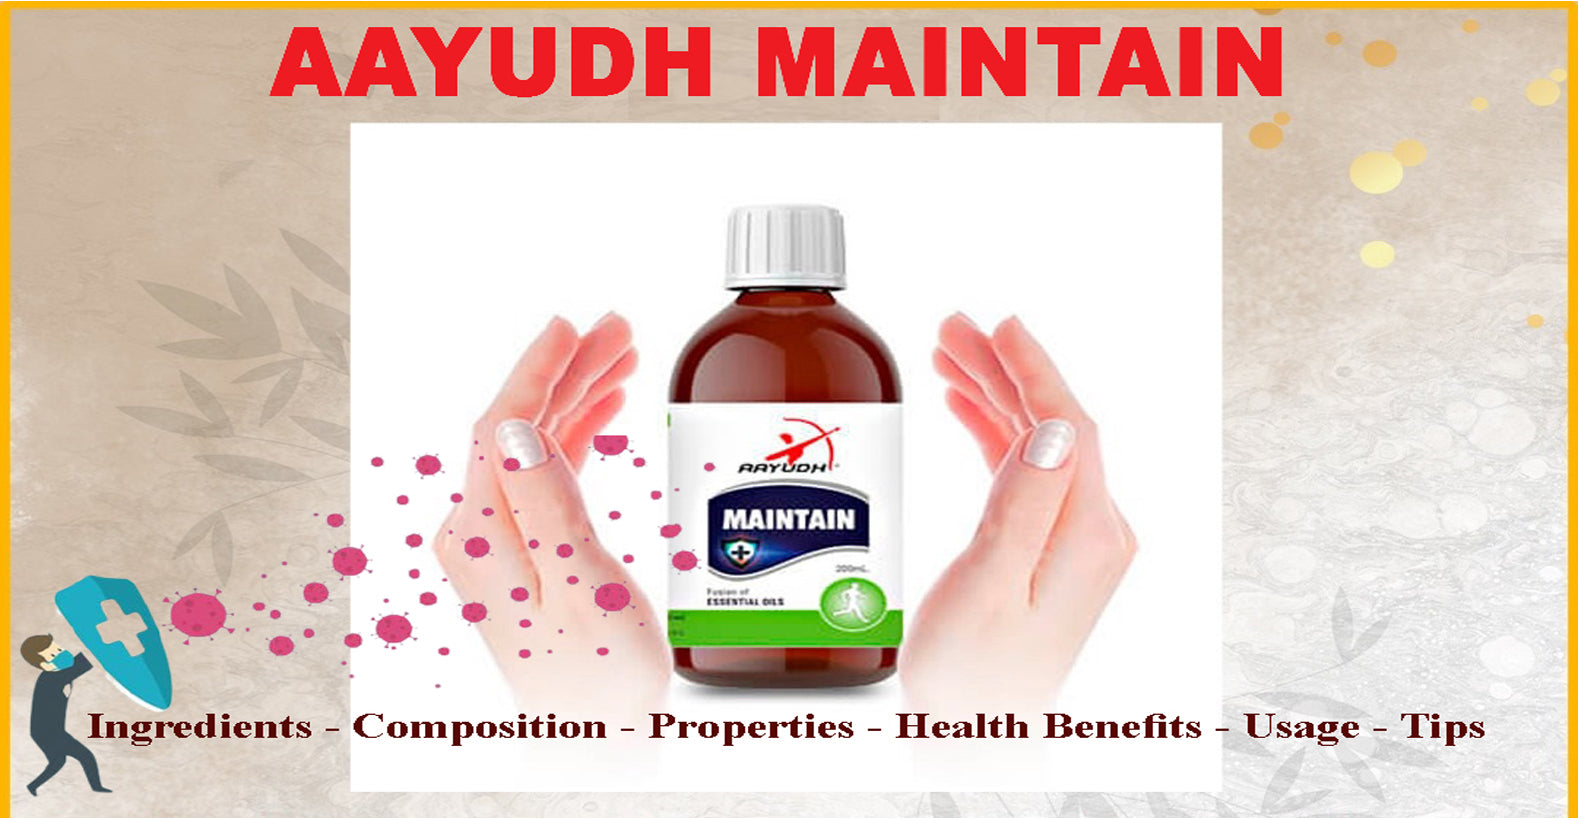 Aayudh Maintain - Ingredients, Composition, Properties, Health Benefits, Usage, Tips